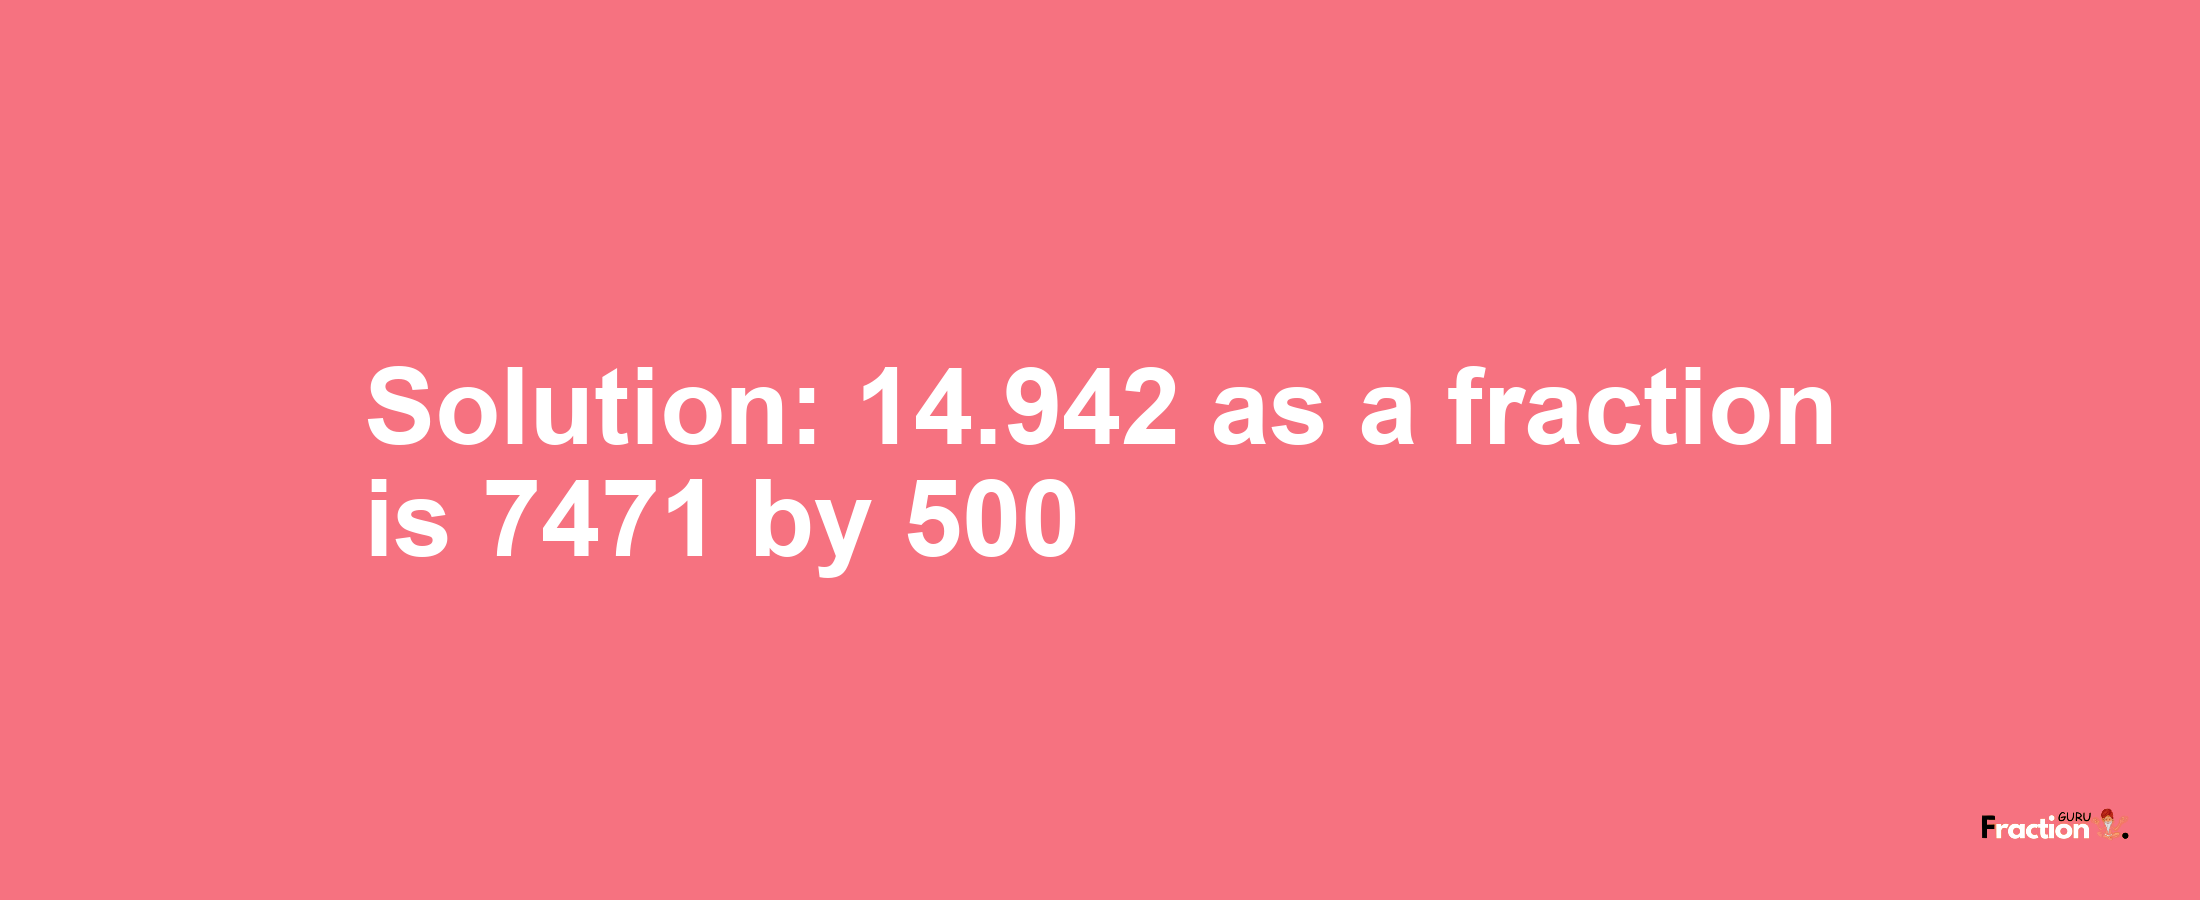 Solution:14.942 as a fraction is 7471/500